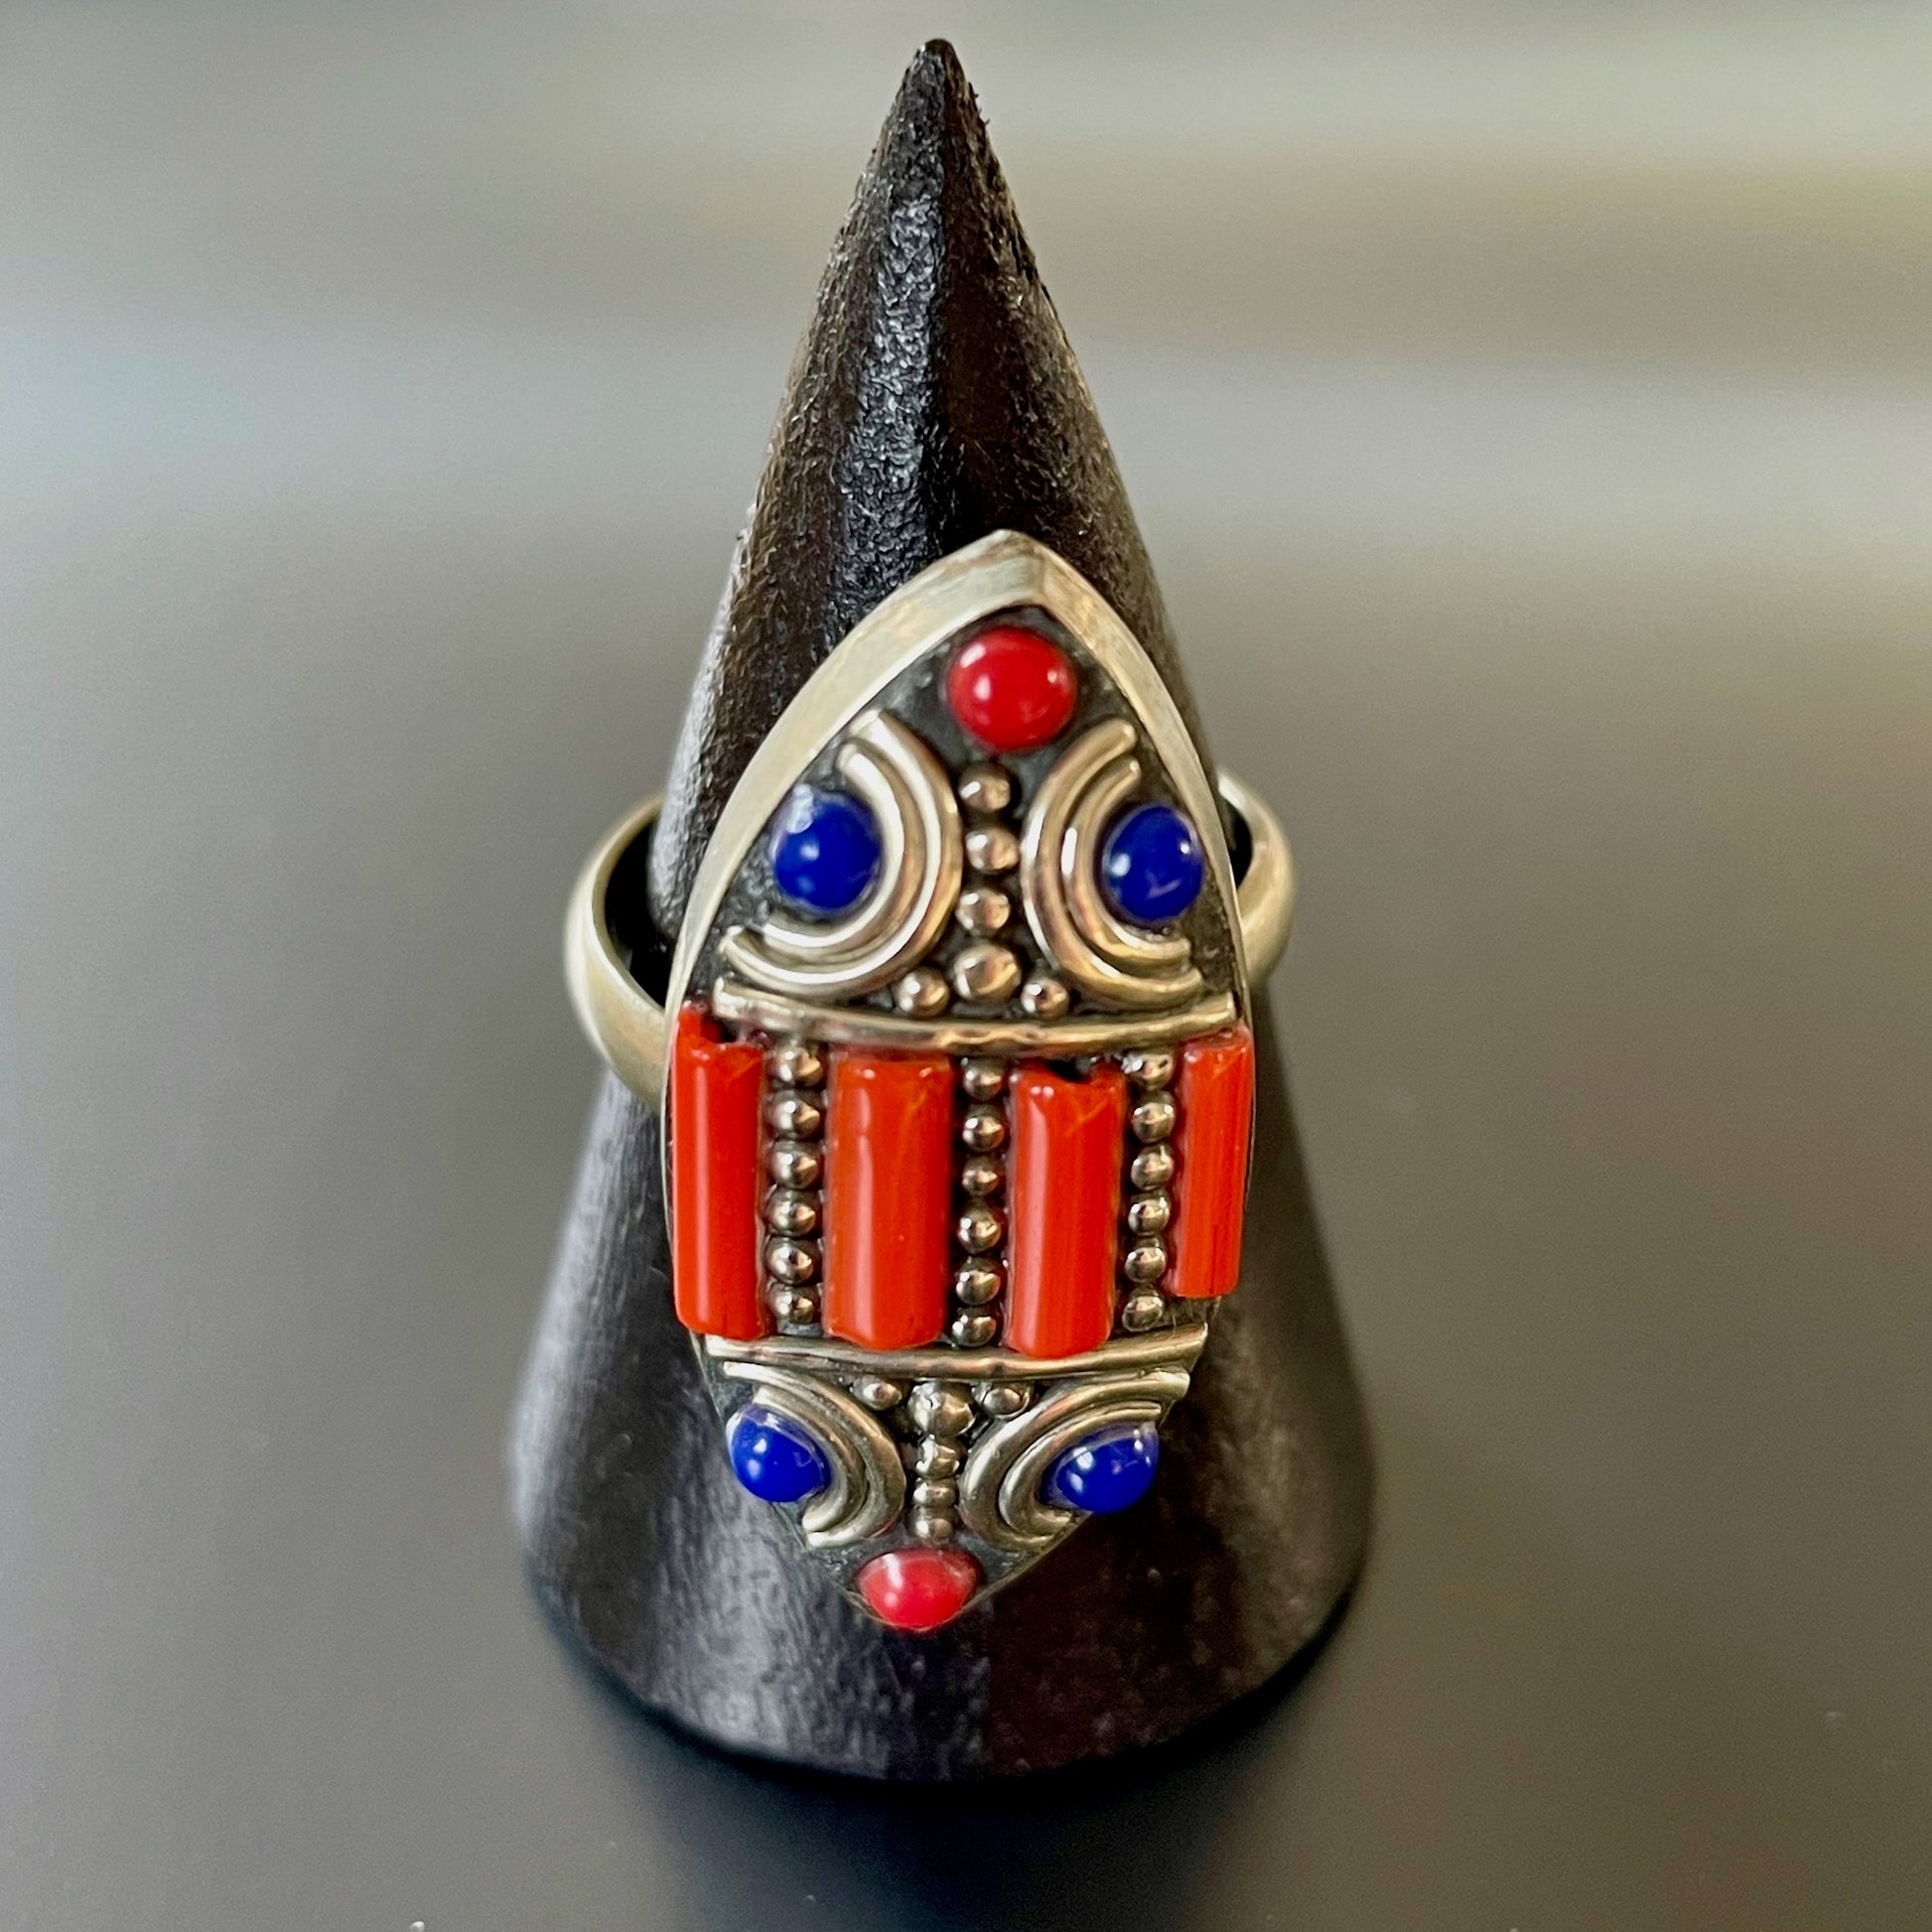 Berber Shield Ring with Red & Blue Stones